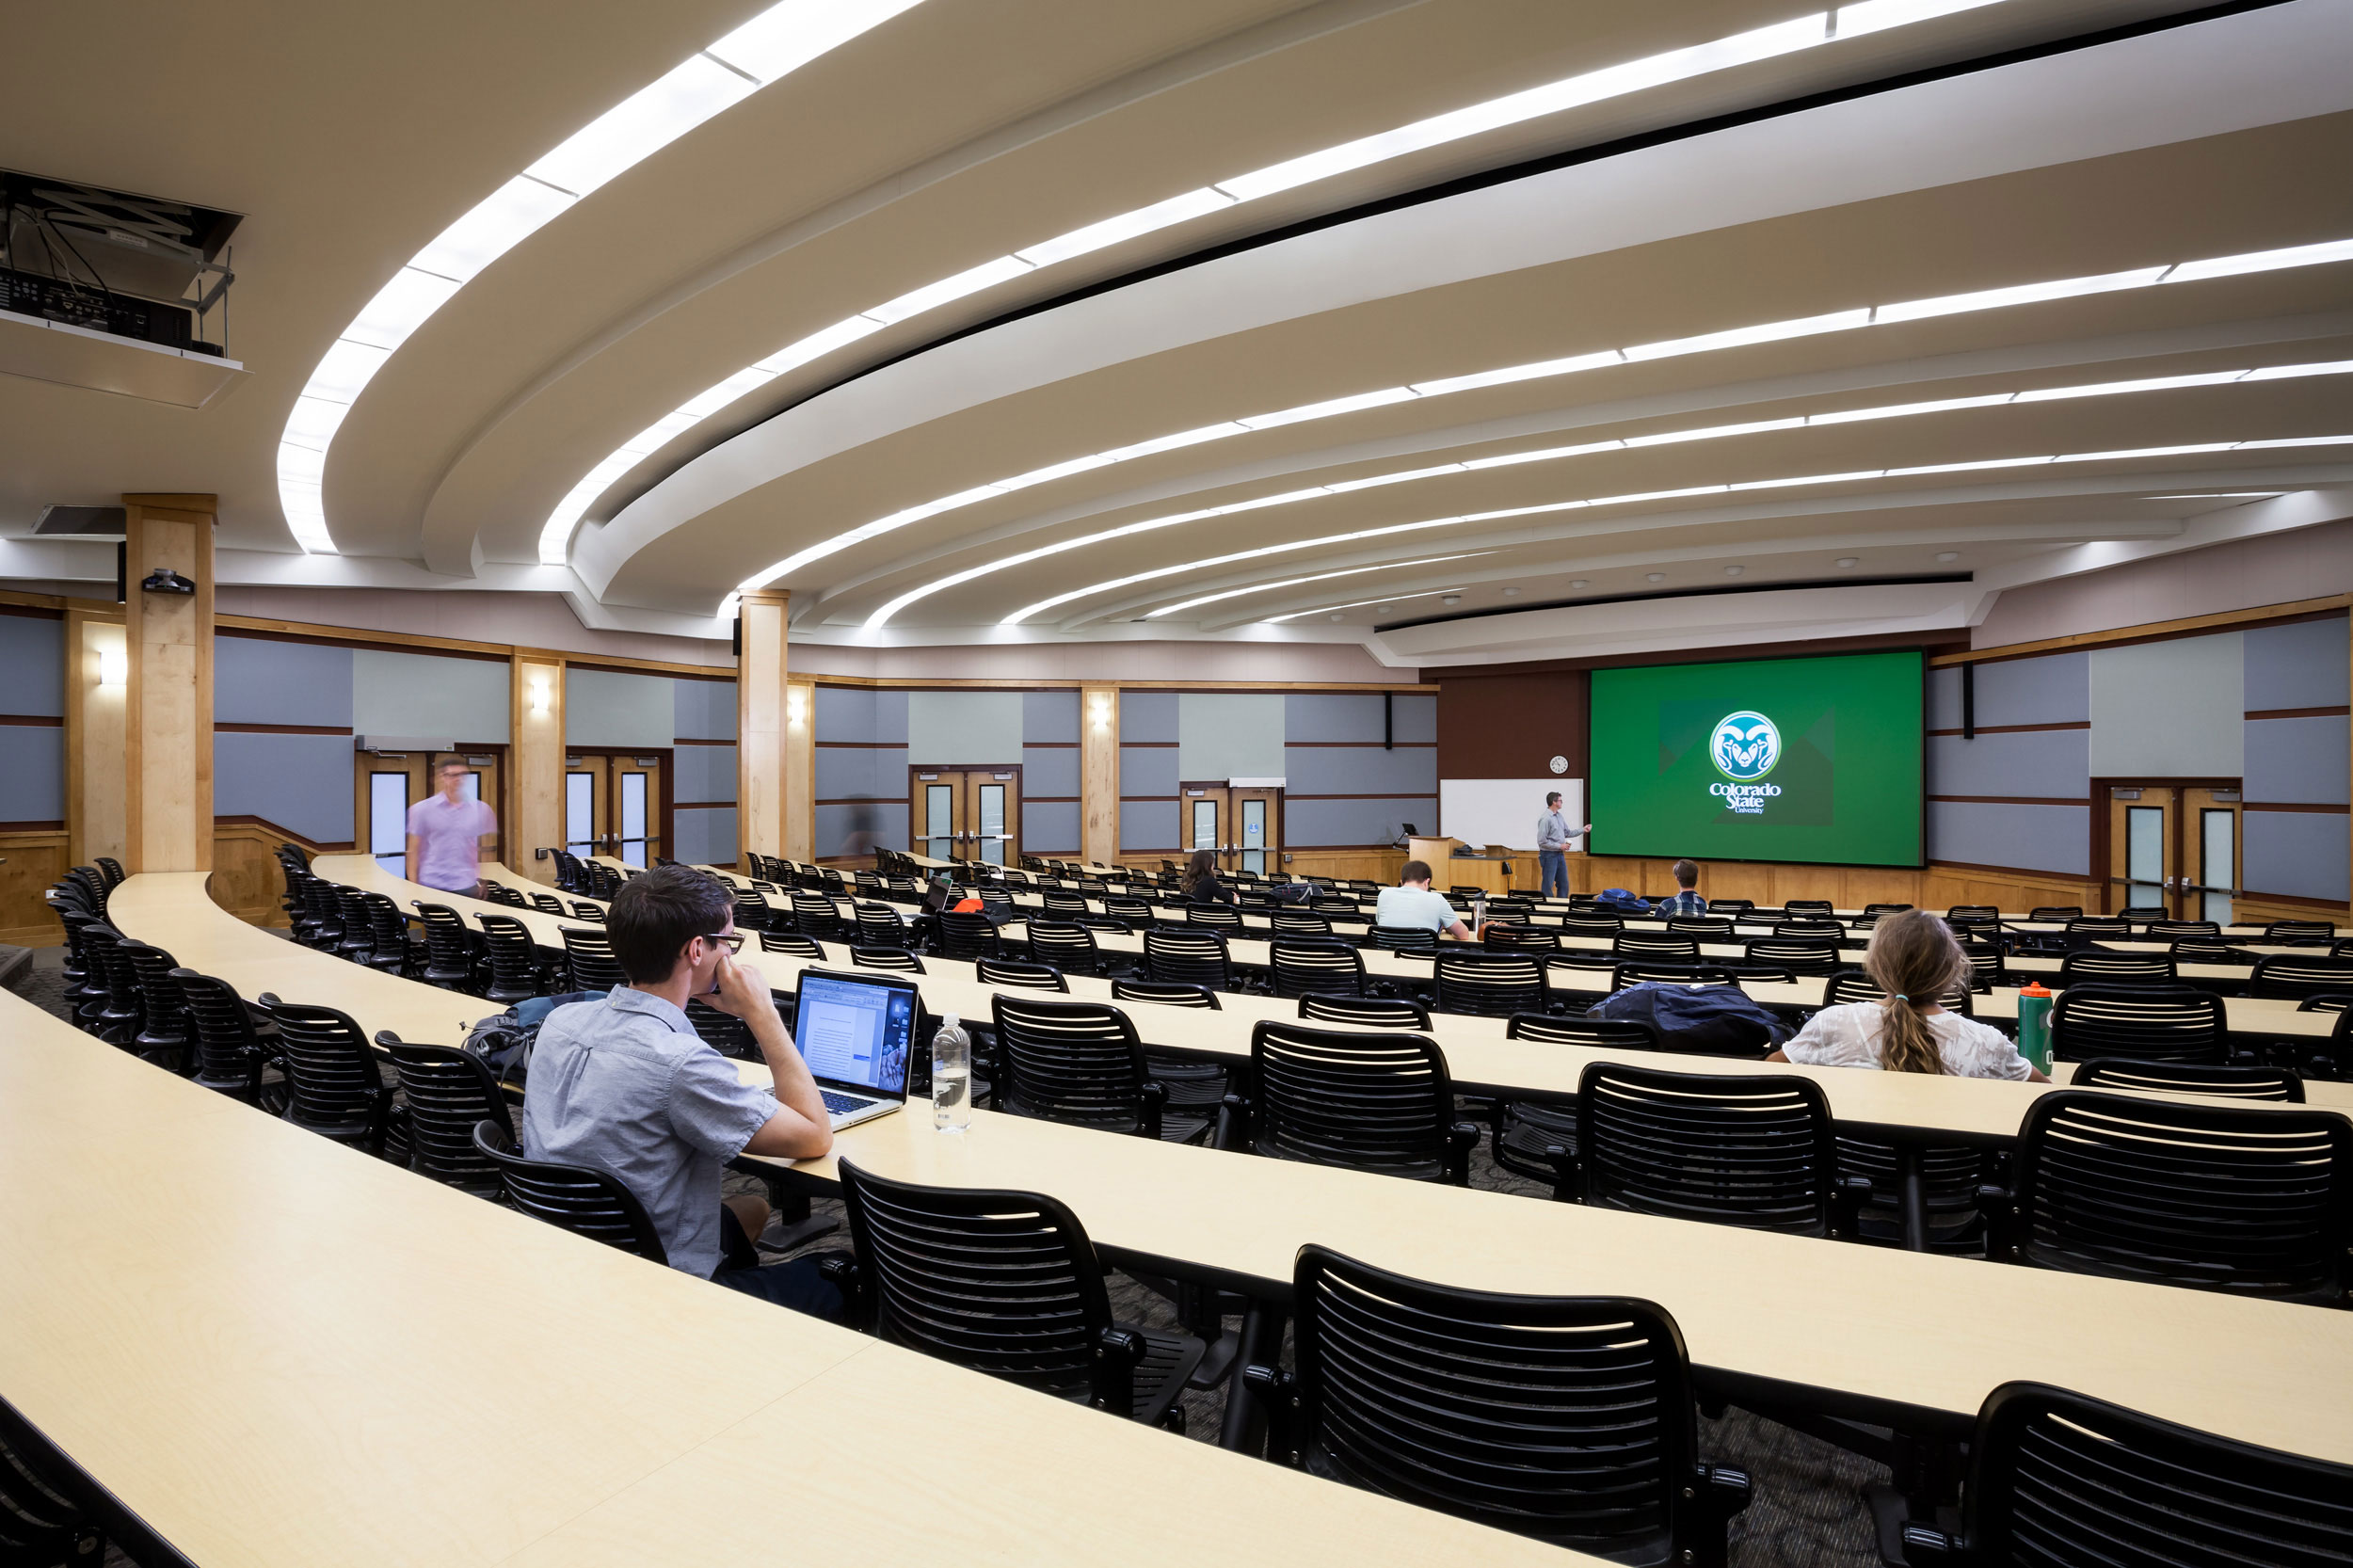 Classroom in the Colorado State University Biology Building